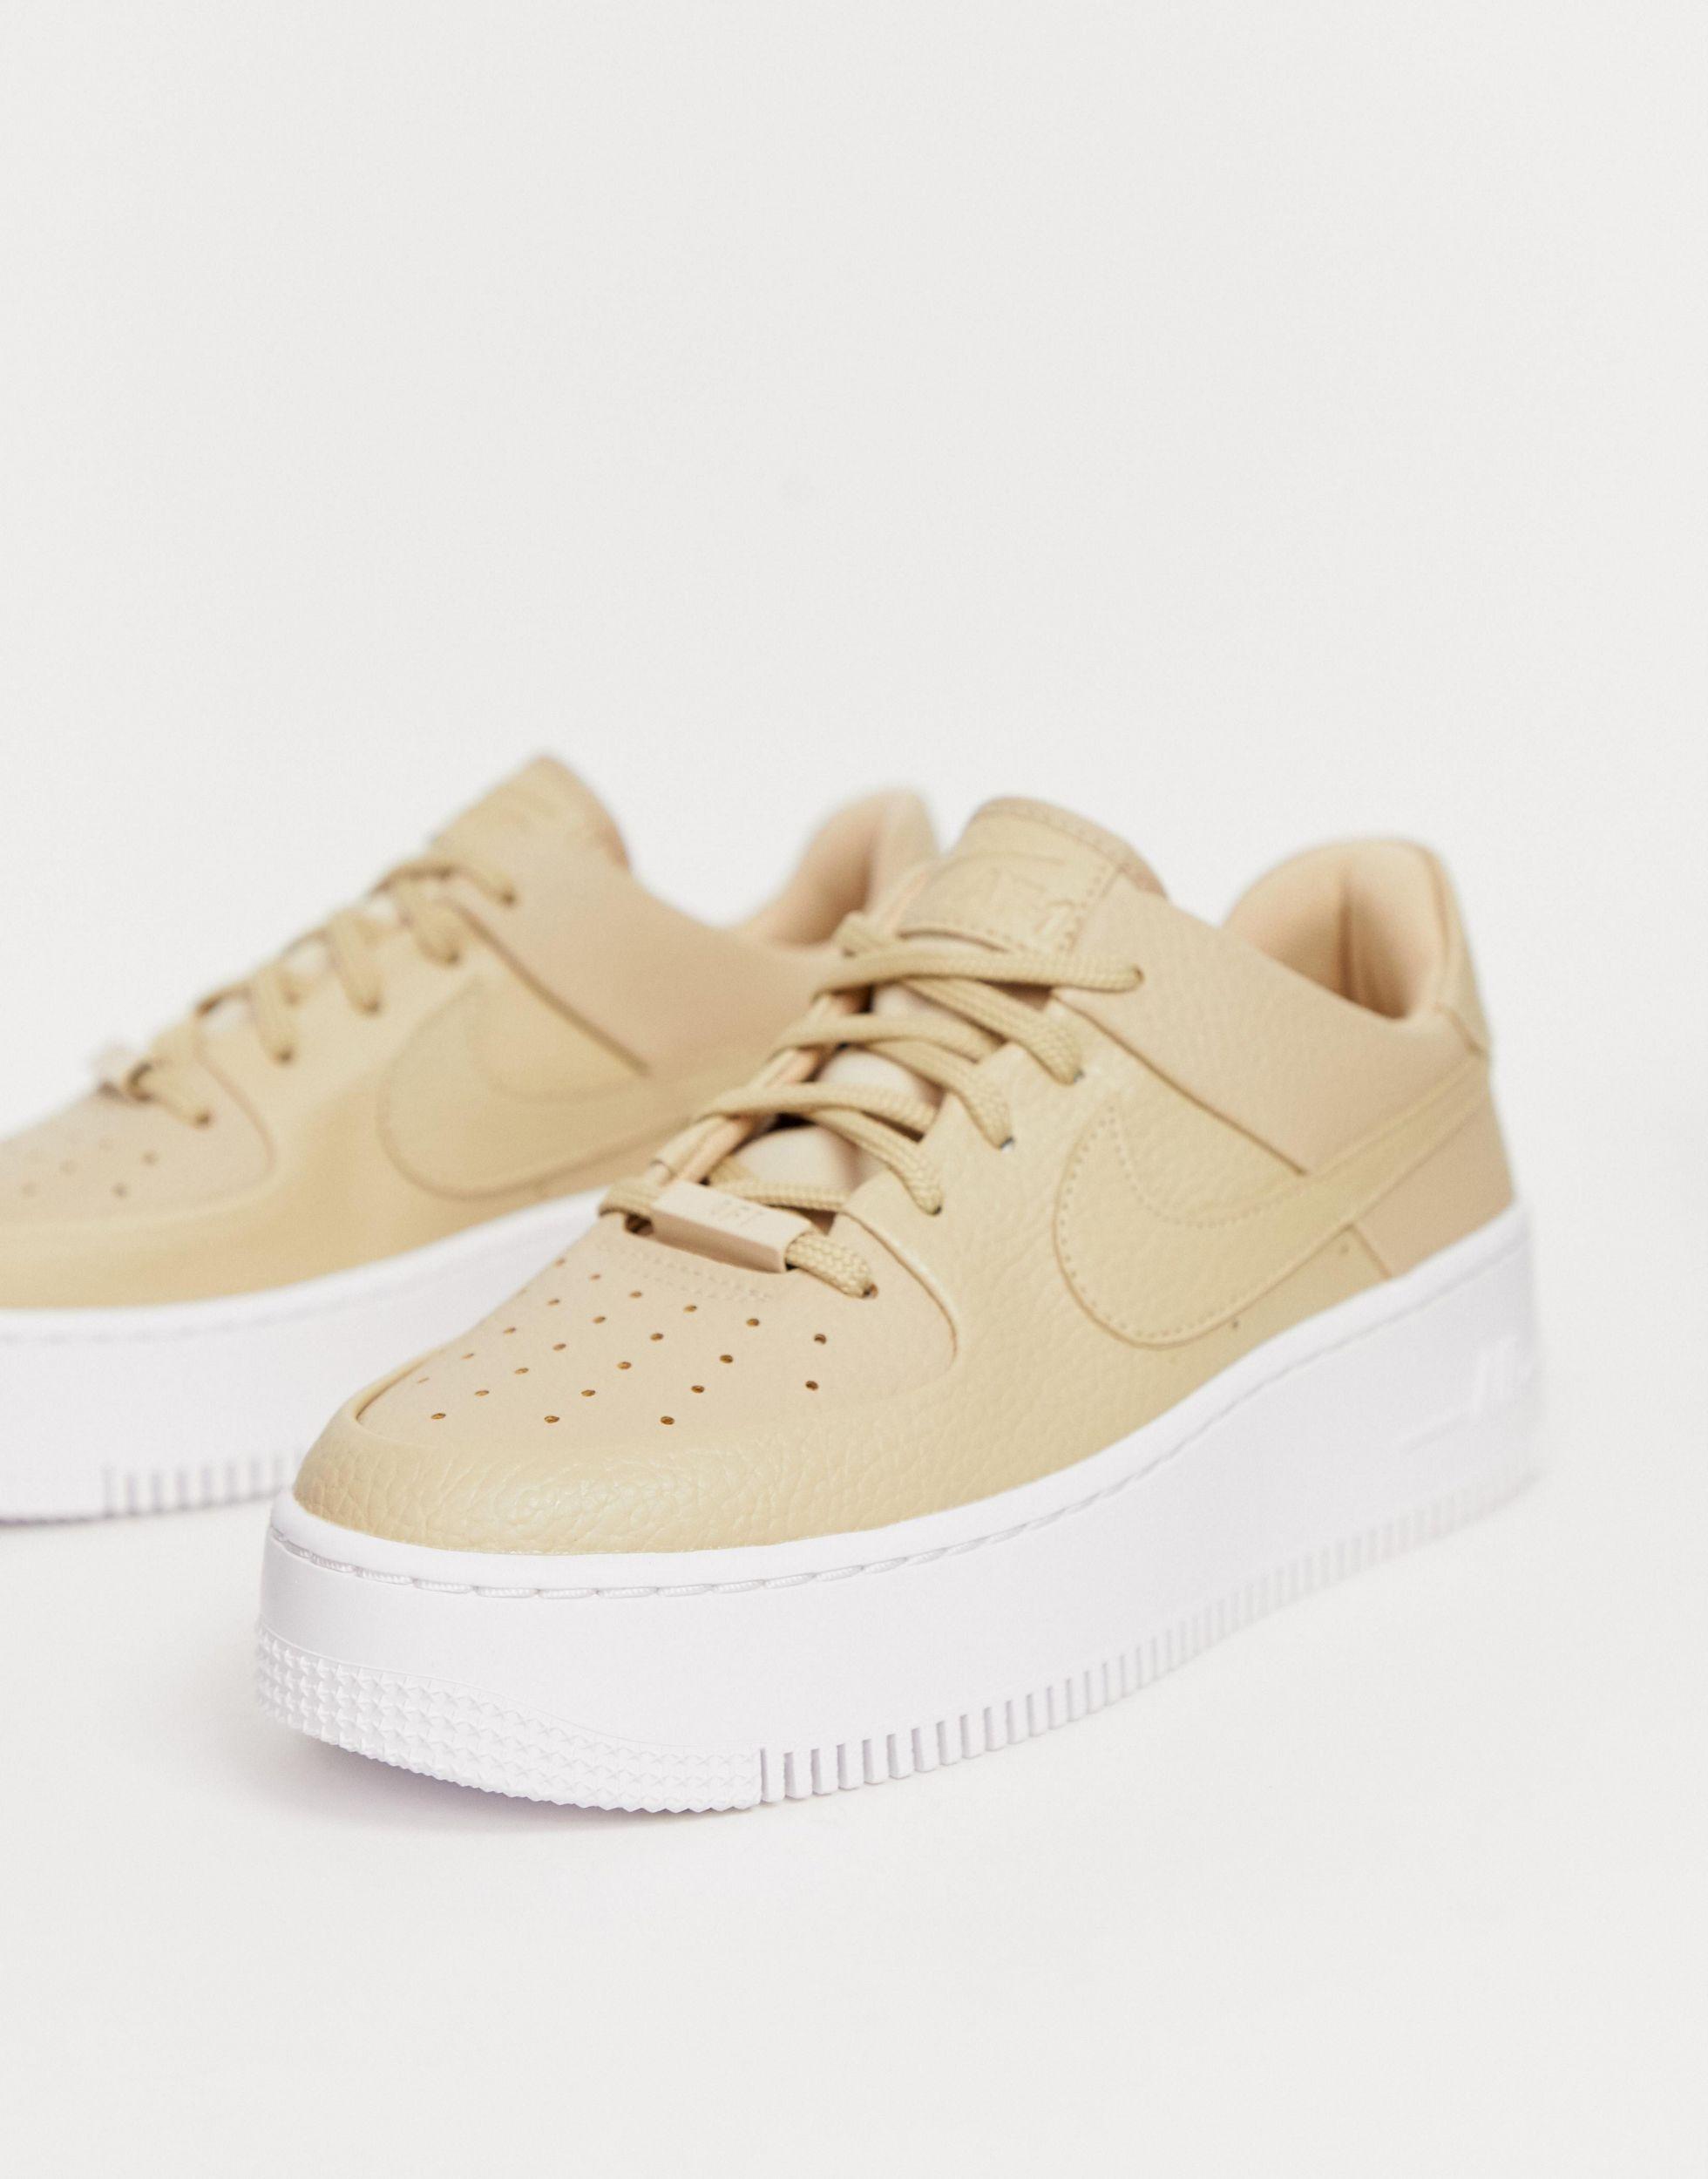 Nike Rubber Air Force 1 Sage Low Trainers in Natural - Lyst